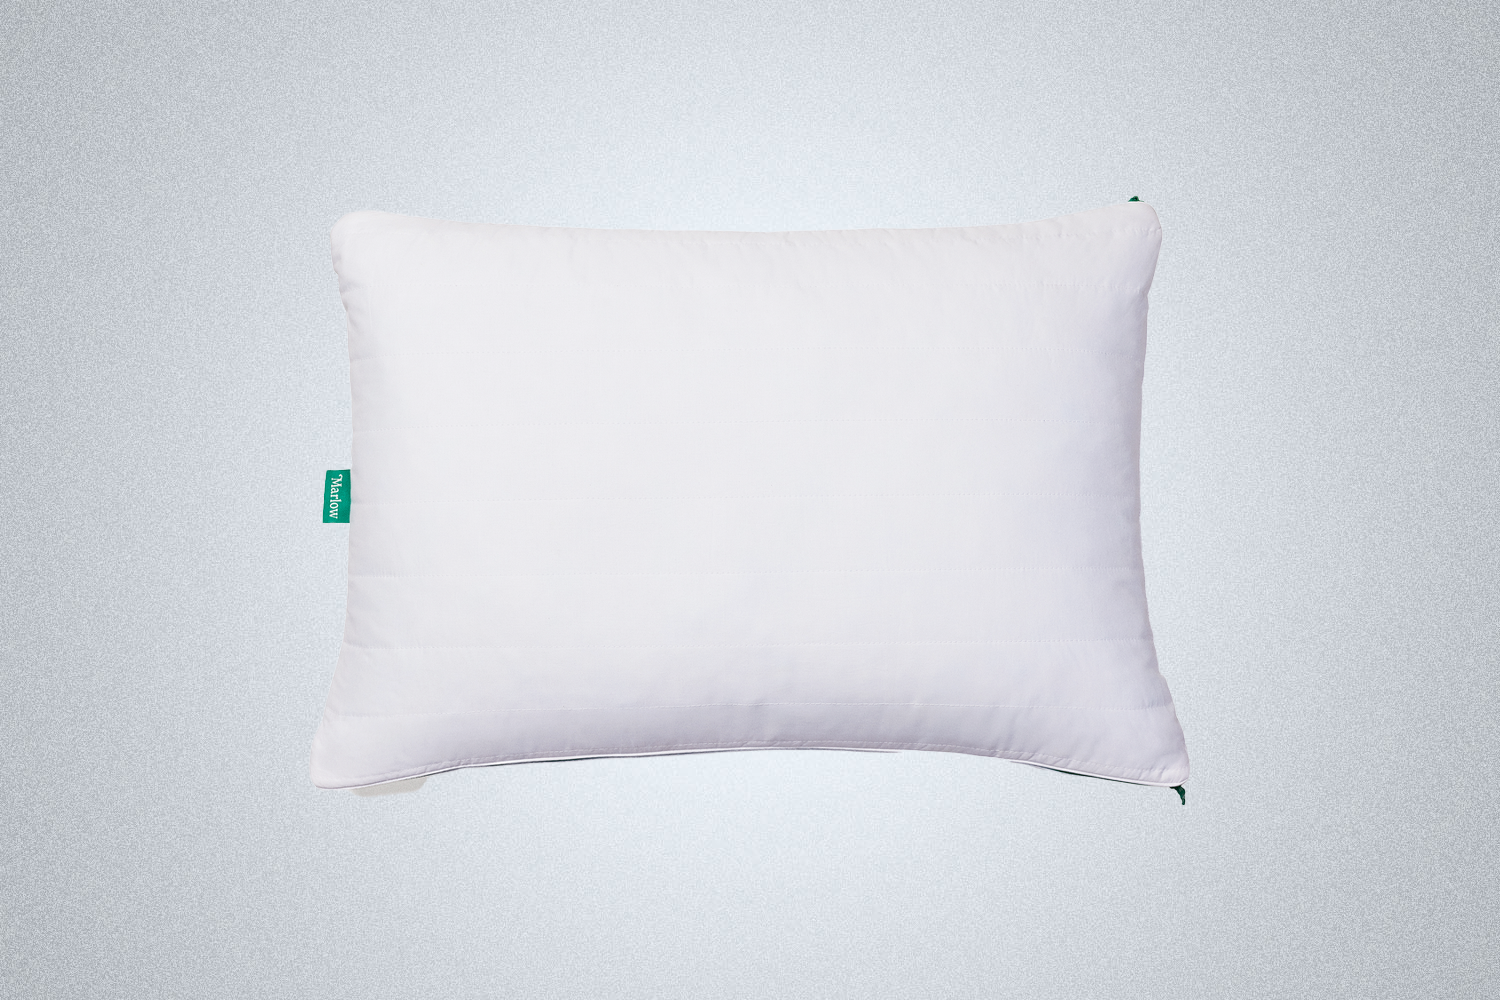 The Marlow The Pillow is one of the best pillows for sleeping in 2022